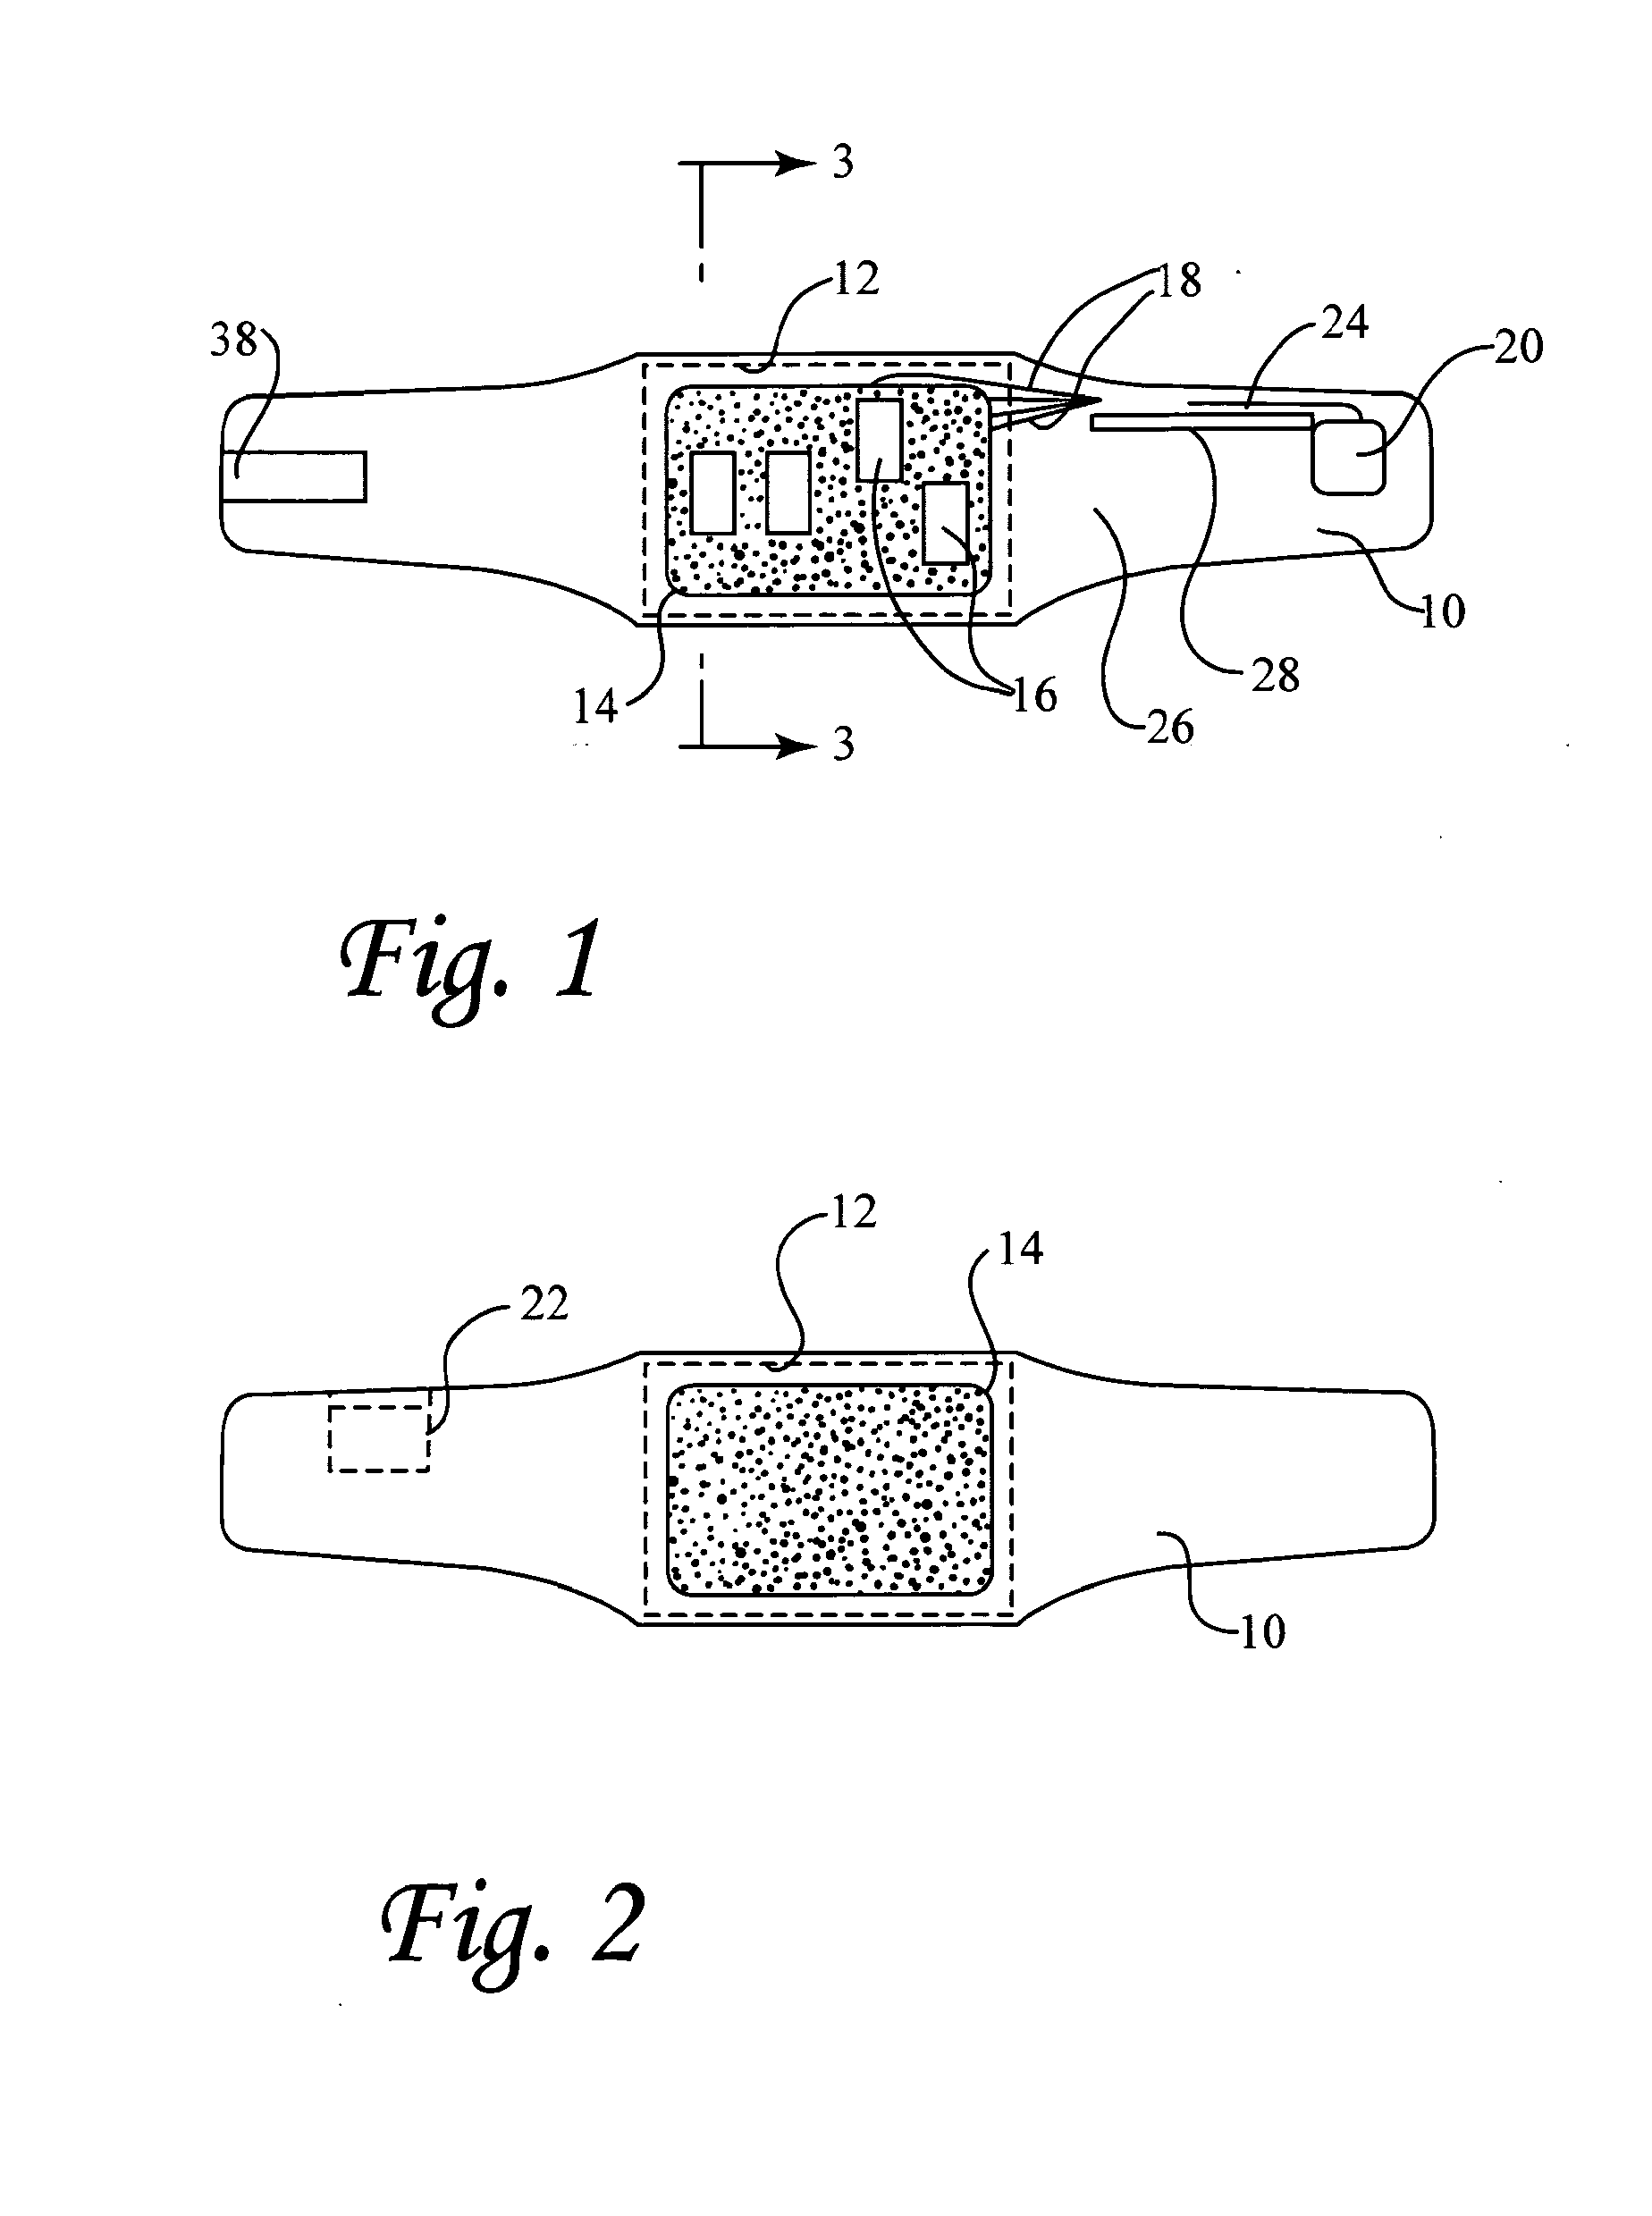 Holder for simultaneously applying a gel pack and a transcutaneous electrical nerve/muscle stimulator